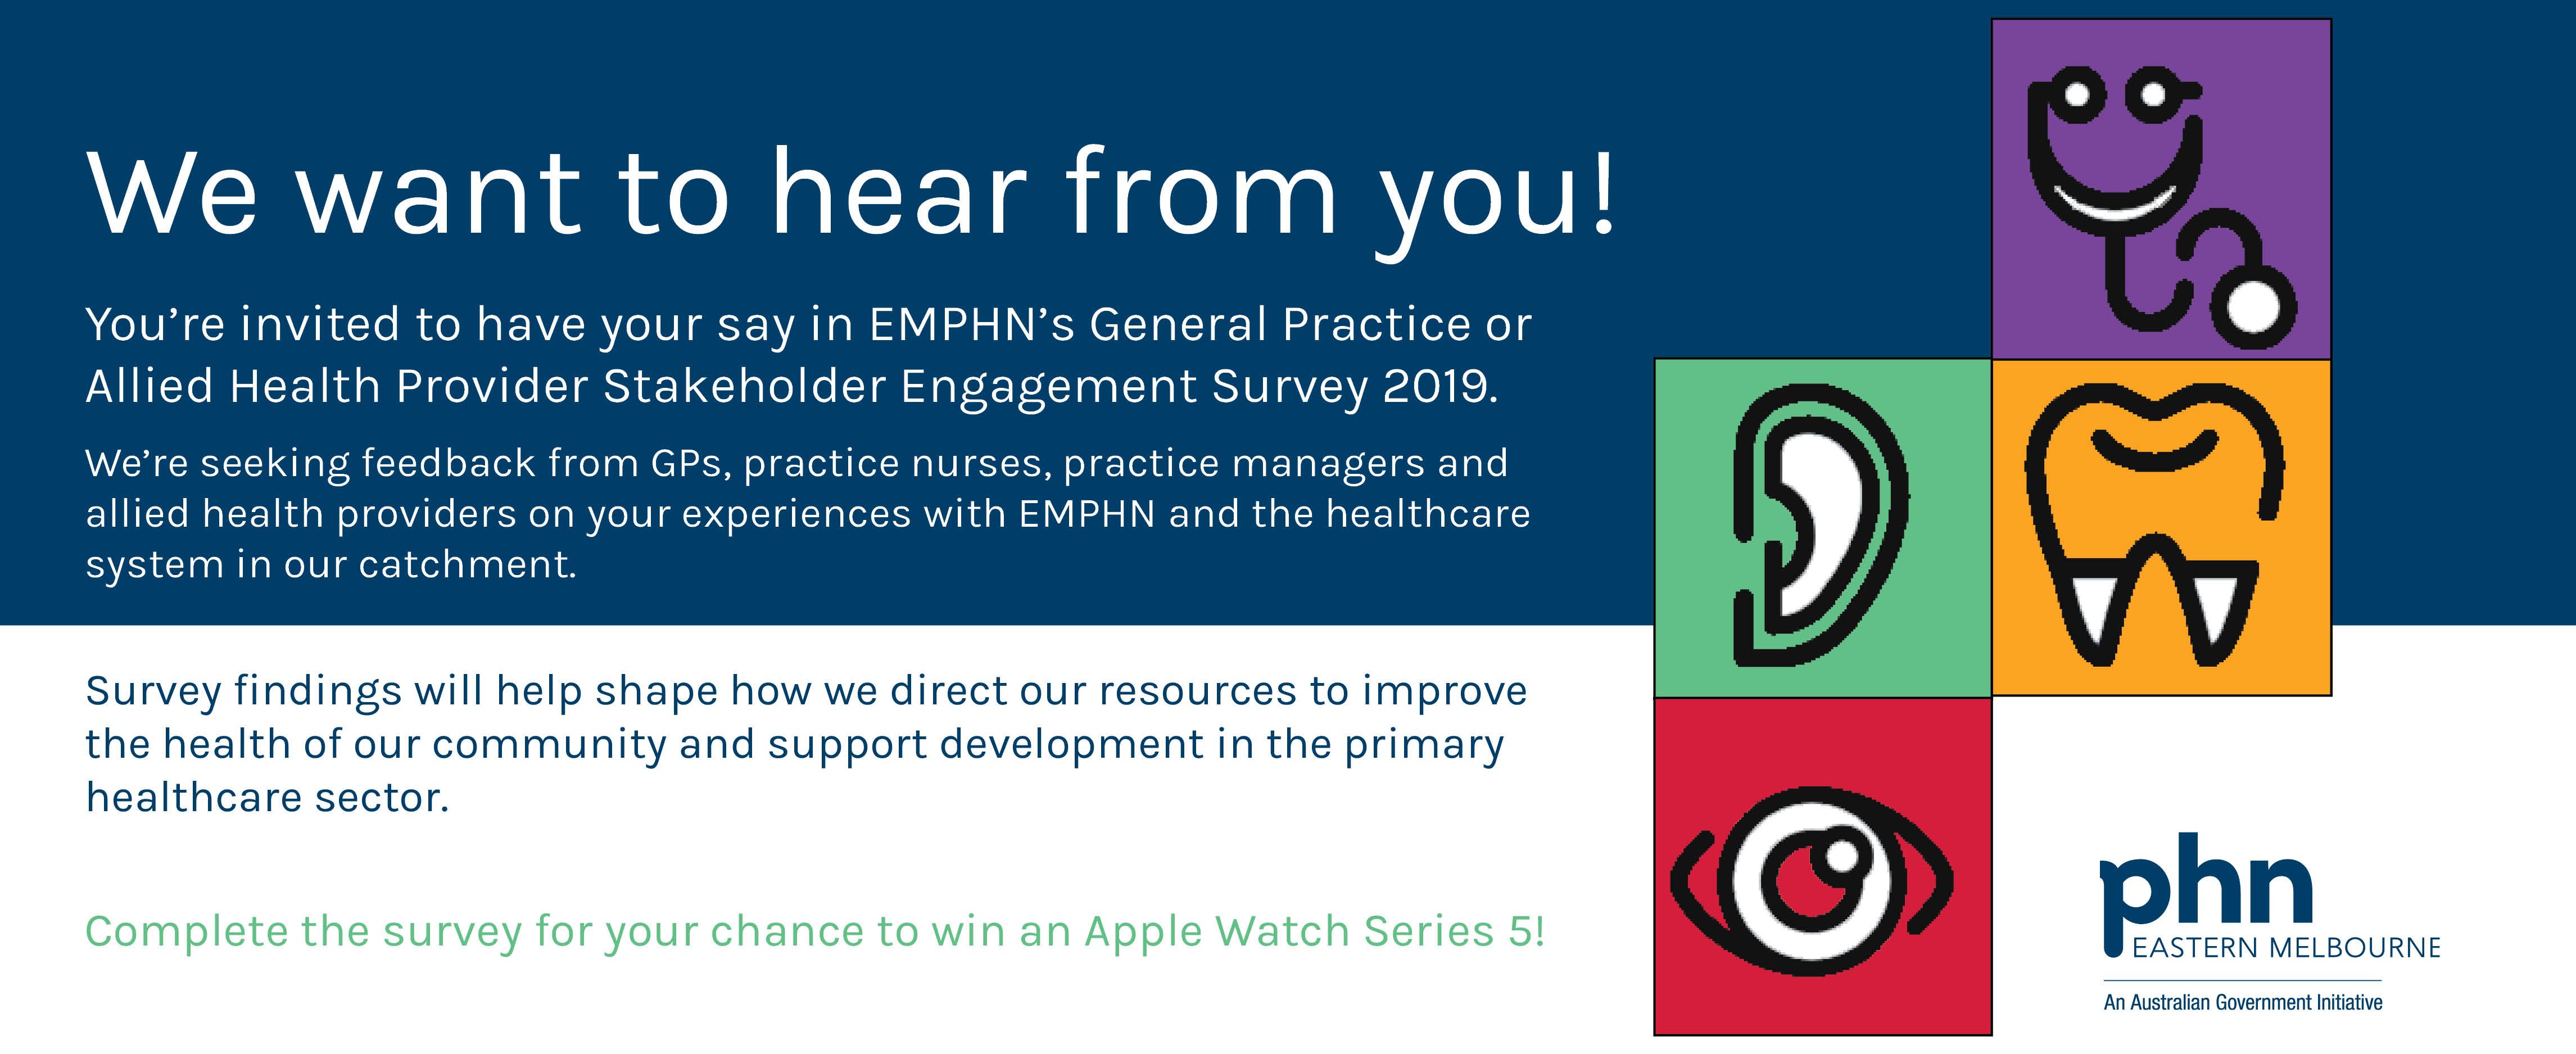 Have your say in EMPHN’s 2019 Stakeholder Engagement Surveys